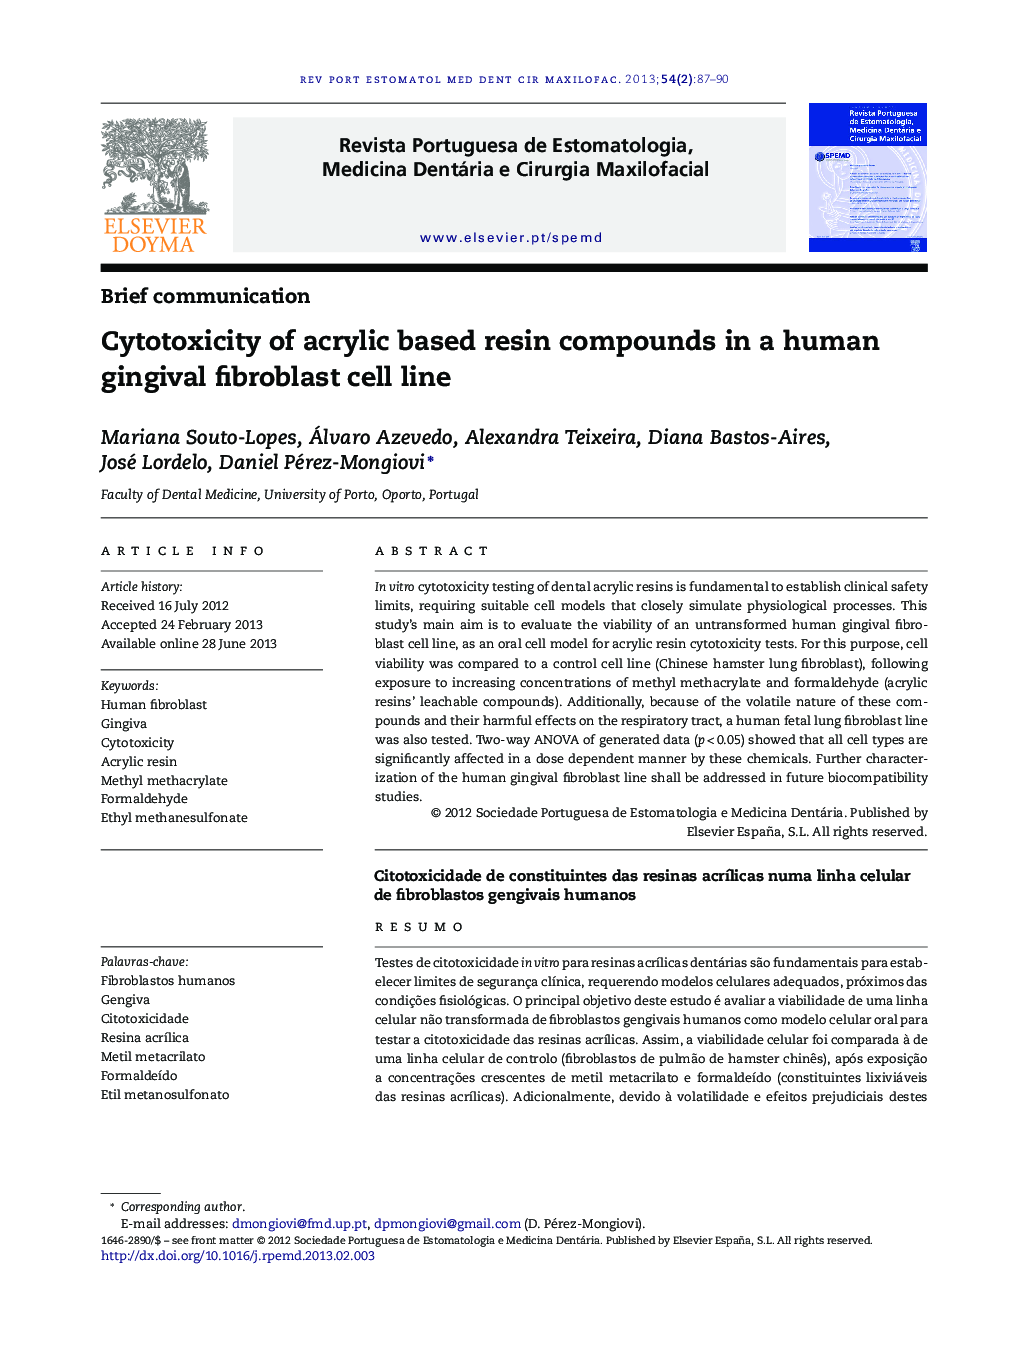 Cytotoxicity of acrylic based resin compounds in a human gingival fibroblast cell line